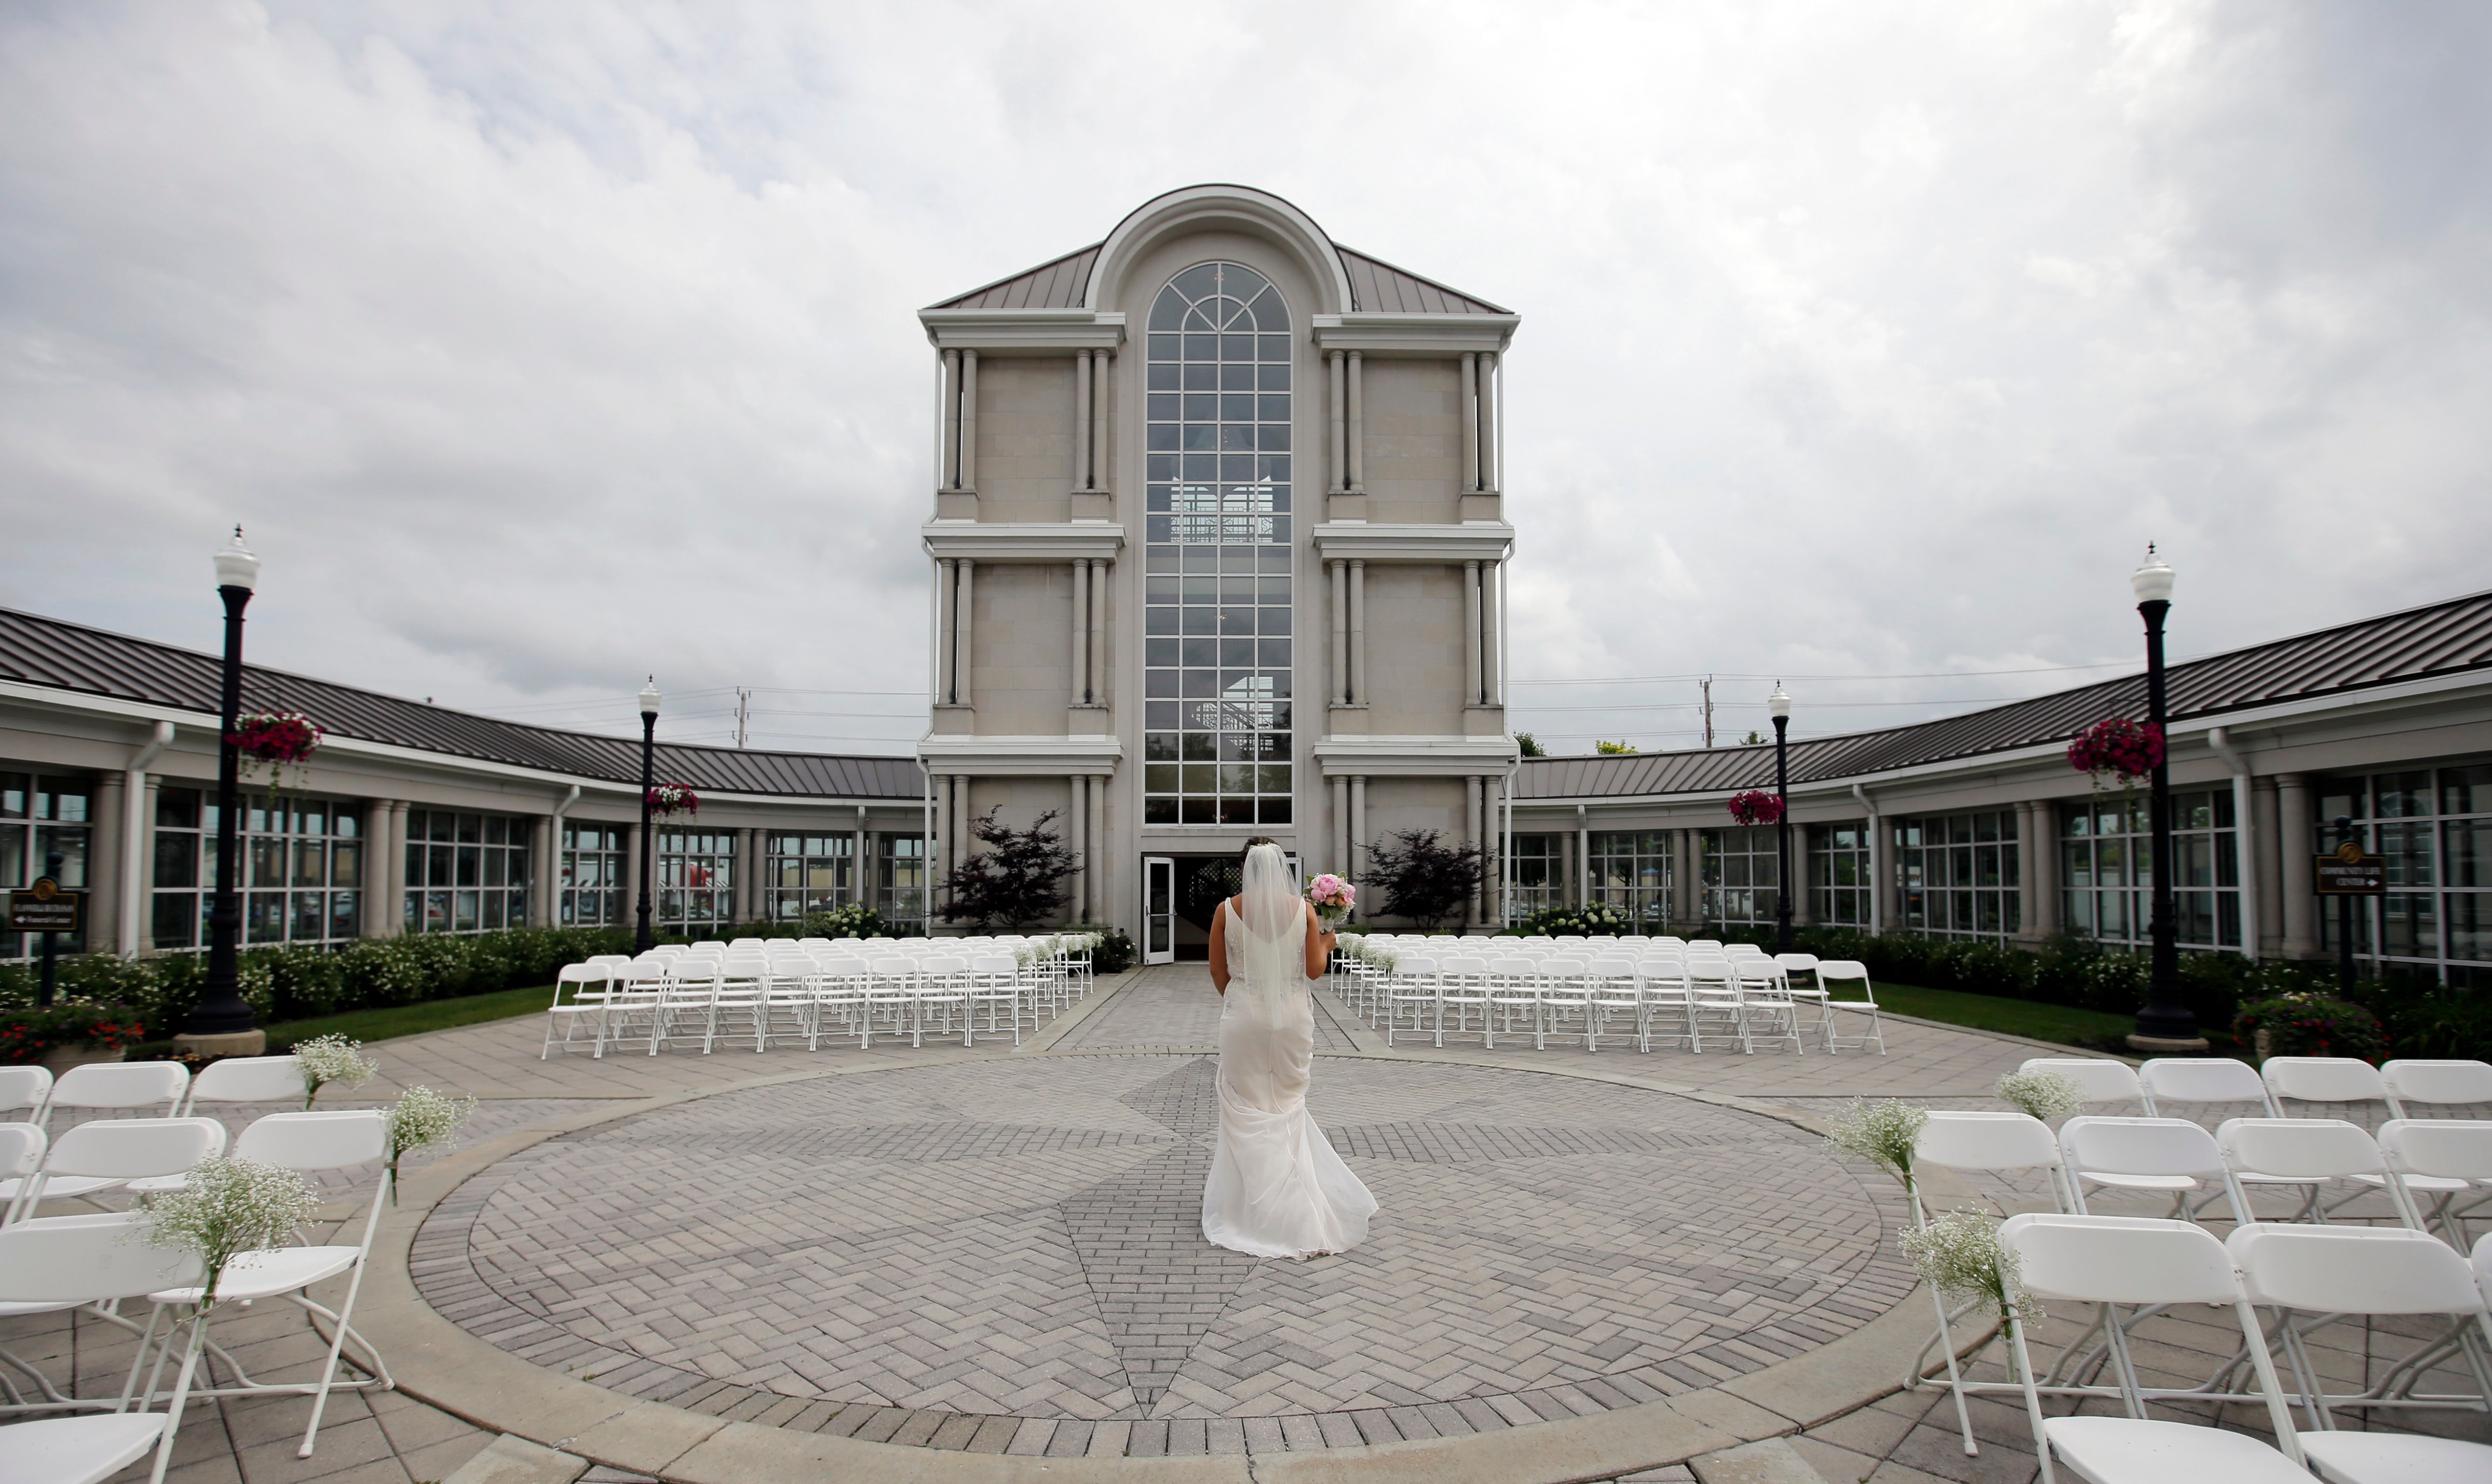 Danessa Molinder walks toward the Crystal Tower for photos before her wedding at the Community Life Center, which sits on cemetery land near a funeral home in Indianapolis. (Darron Cummings&mdash;AP)